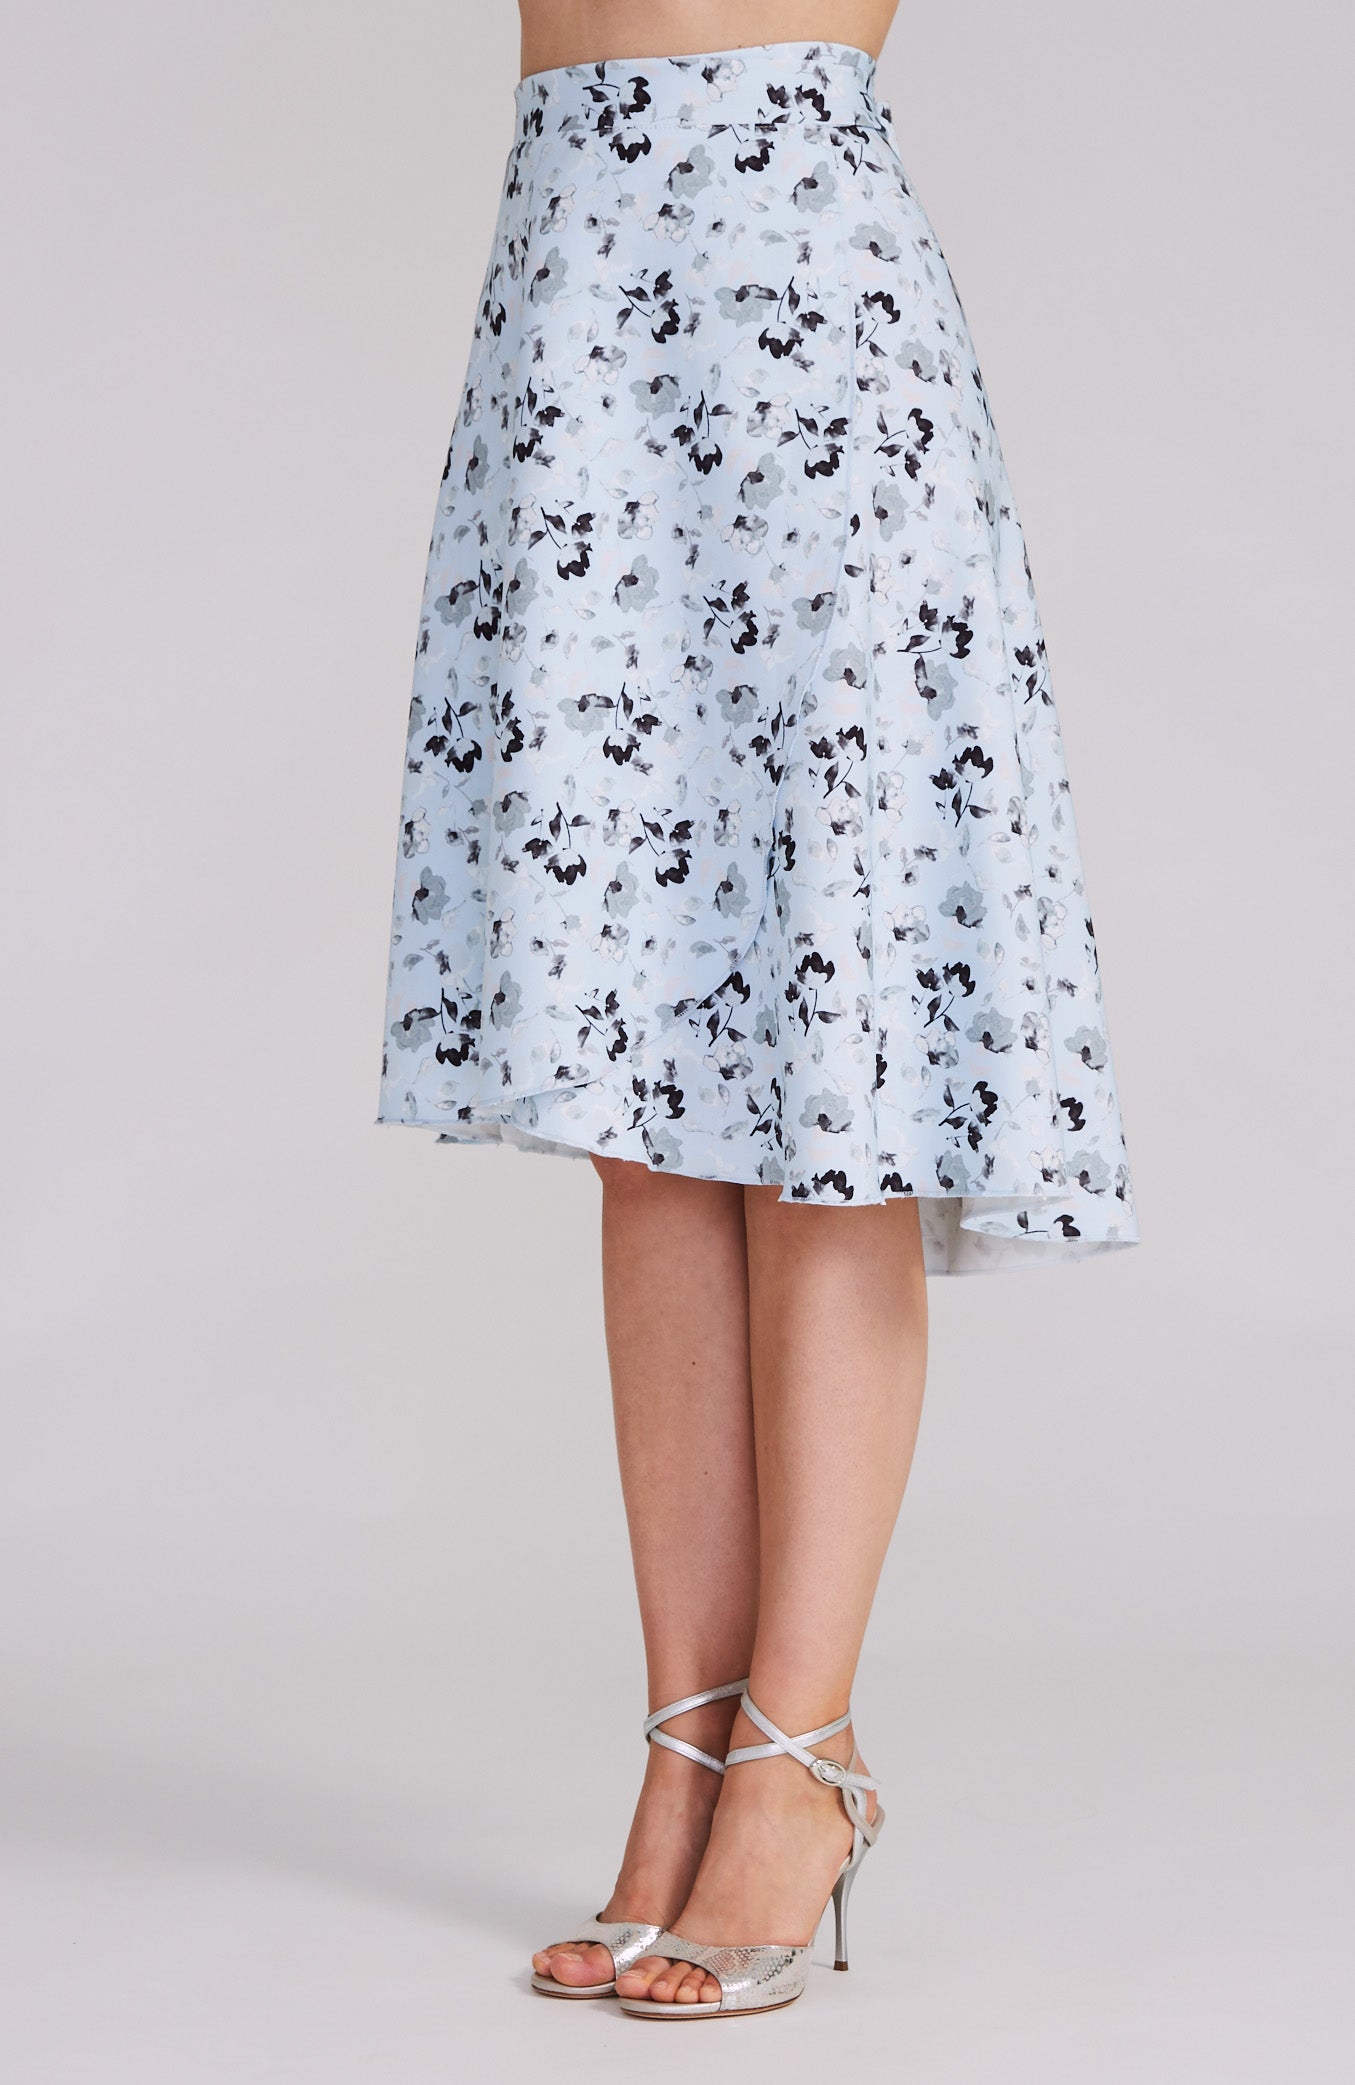 wrap skirt in pale blue